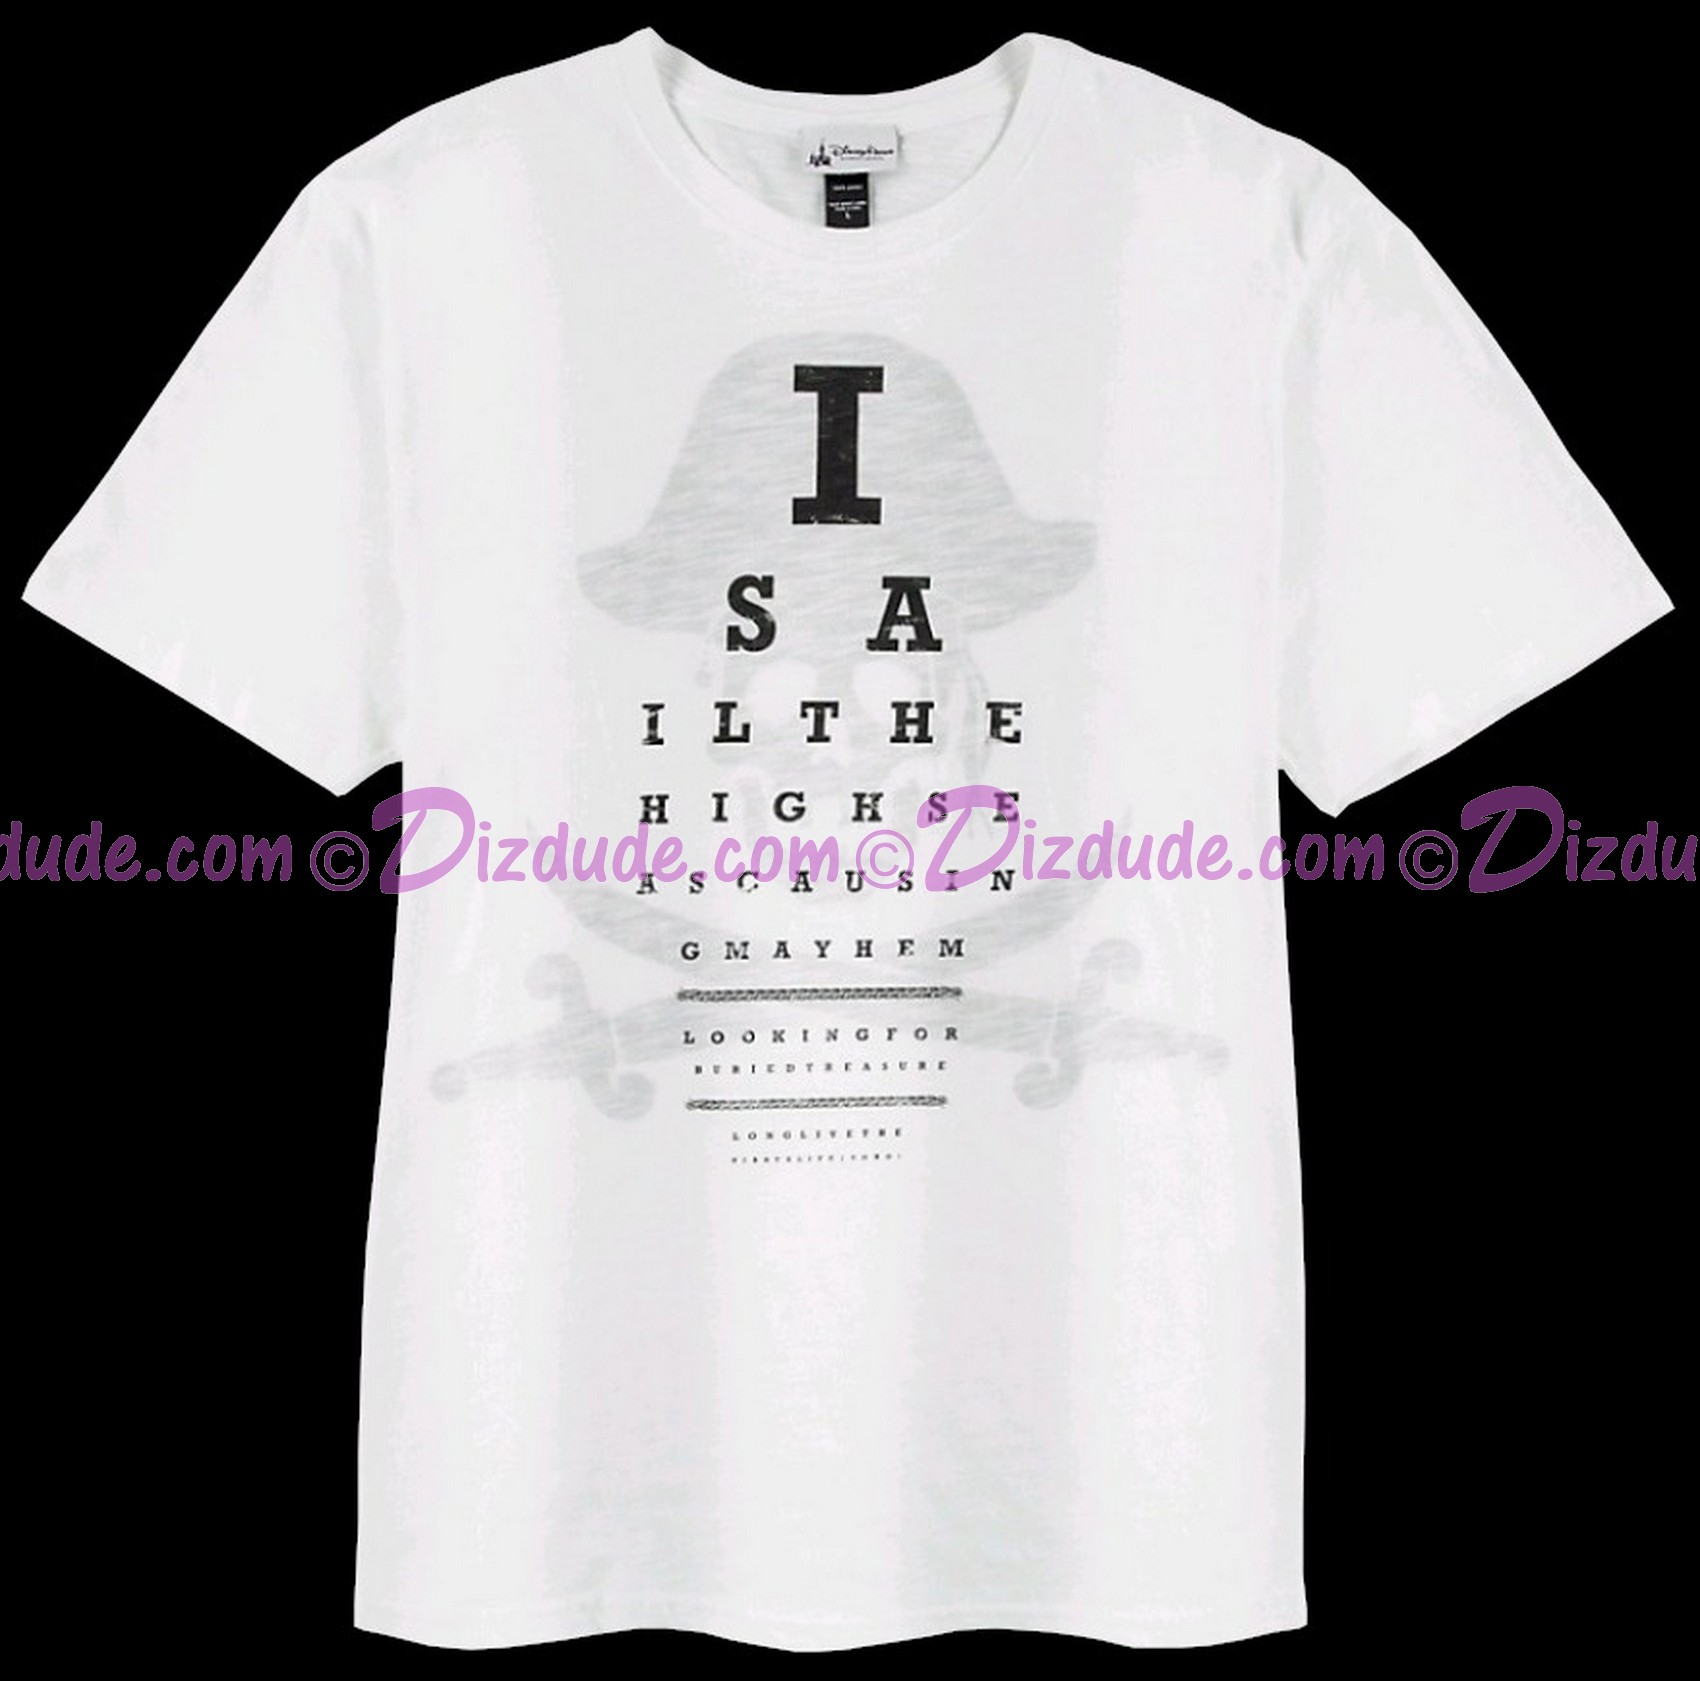 (SOLD OUT) Pirate Eye Chart Adult T-shirt (Tee, Tshirt or T shirt) Disney's Pirates of the Caribbean